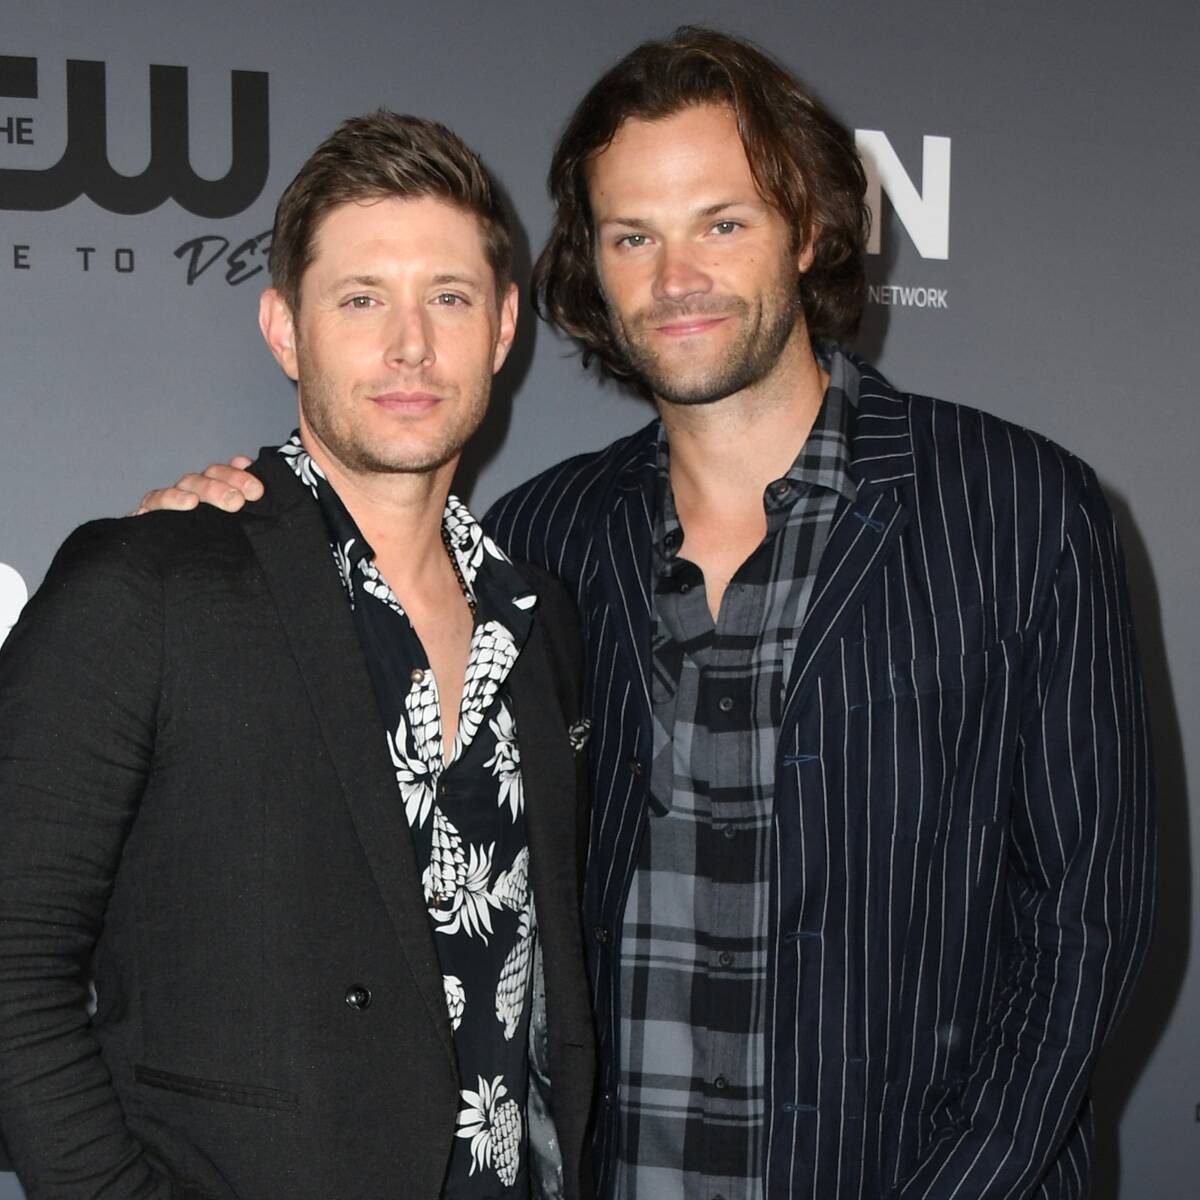 Why Jared Padalecki Is Now "Good" With Jensen Ackles After Supernatural Prequel Drama